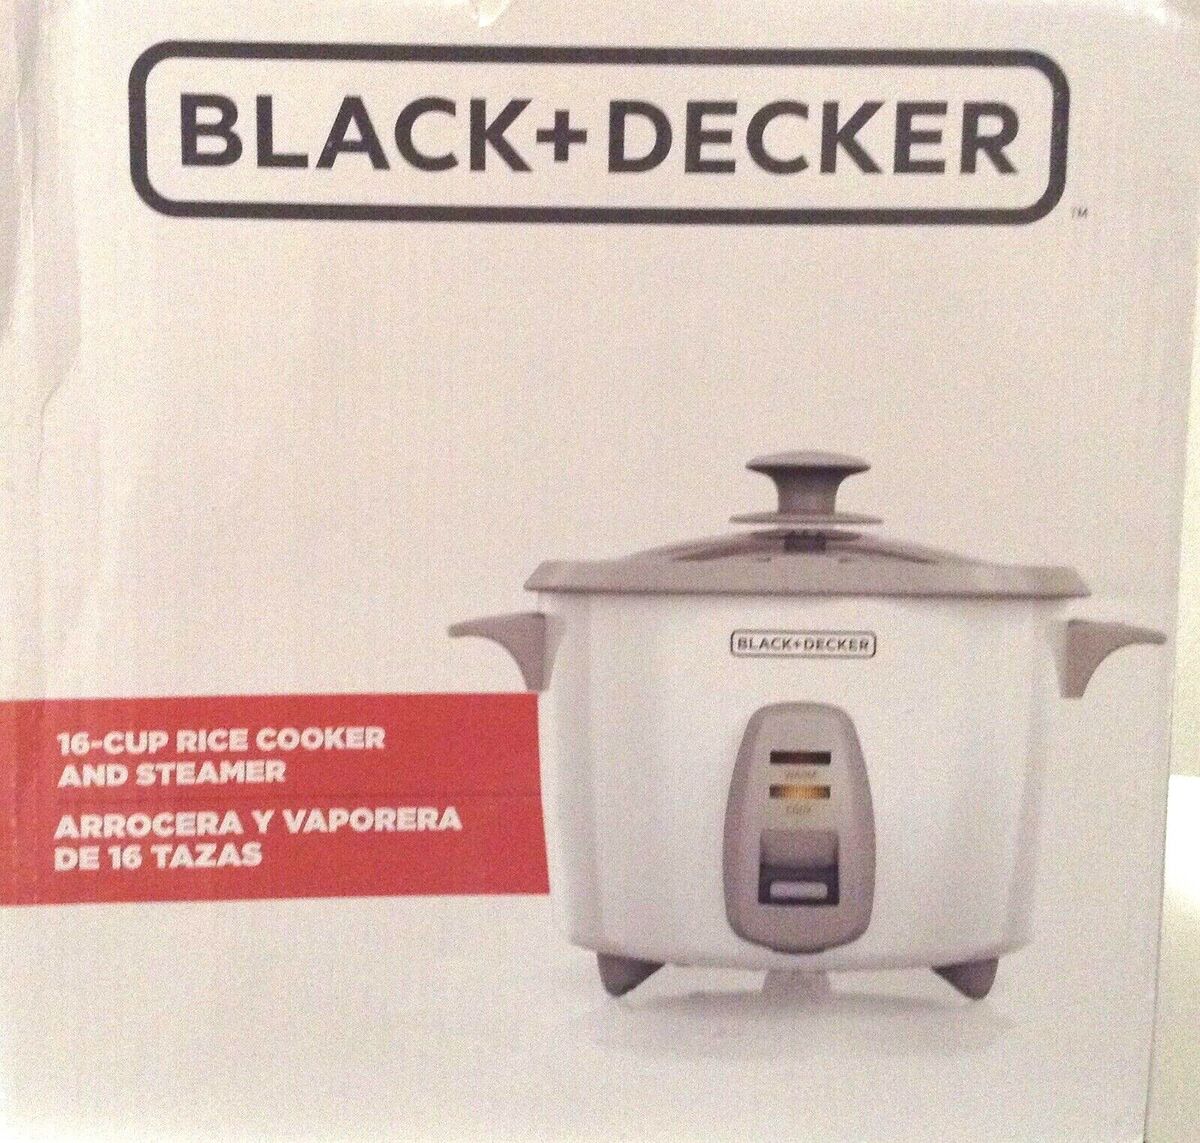 BLACK+DECKER 16-Cup Rice Cooker, White 